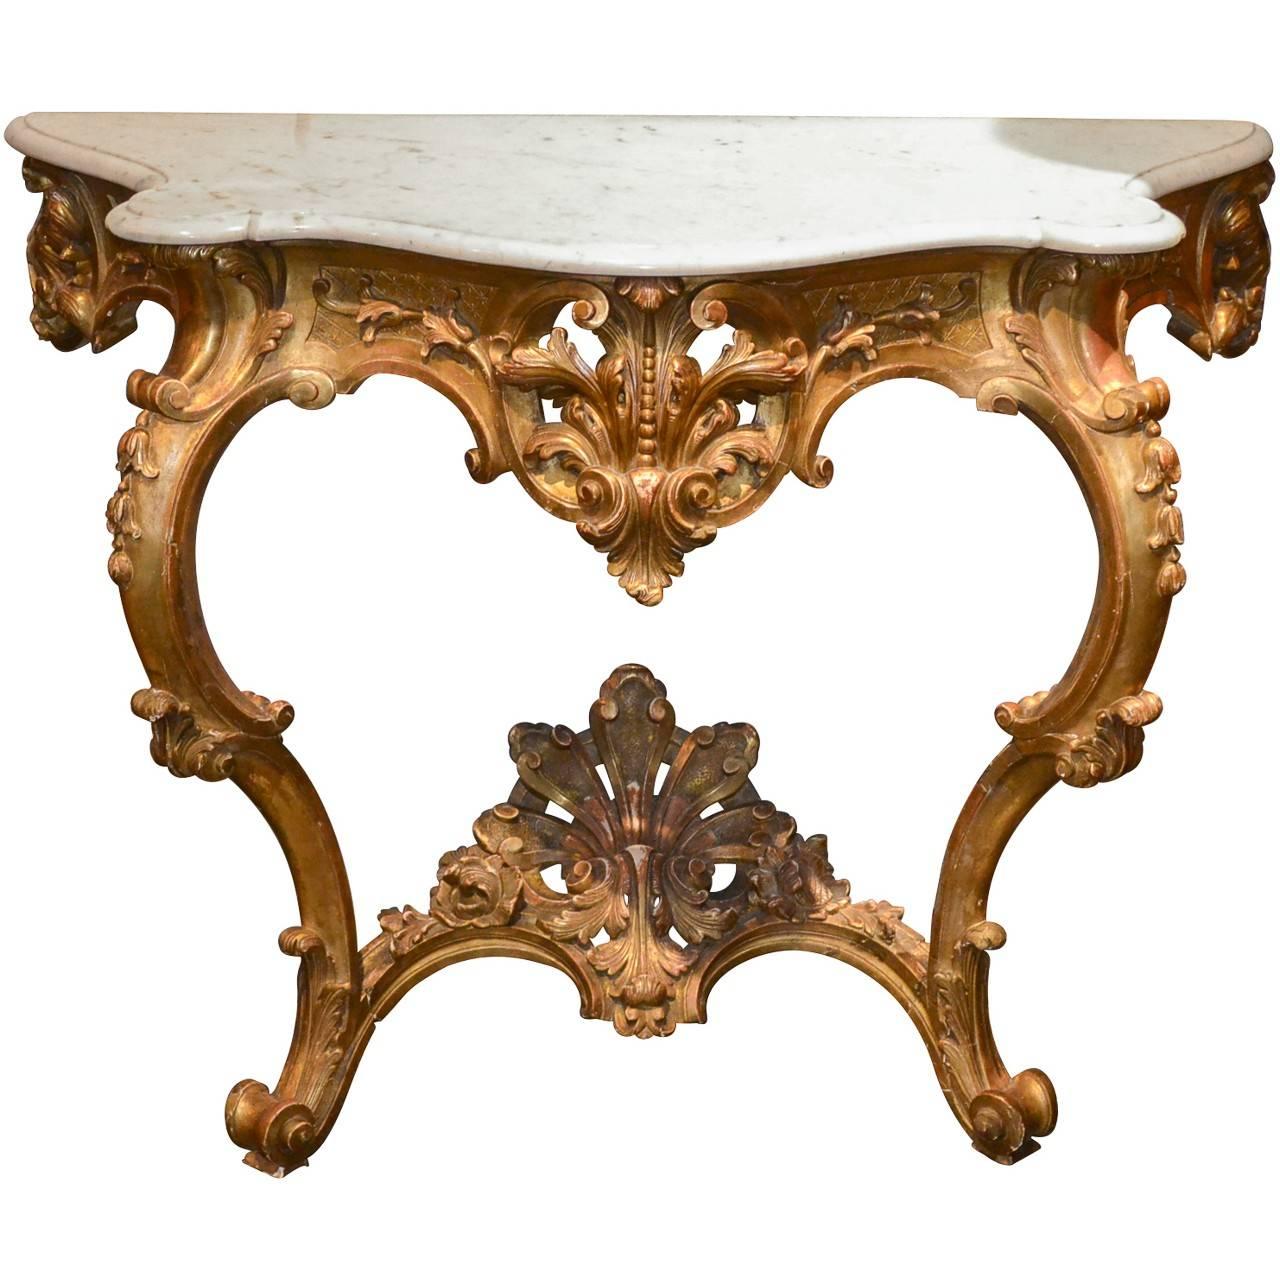 Antique French Carved Giltwood Console with Carrara Marble Top, circa 1860